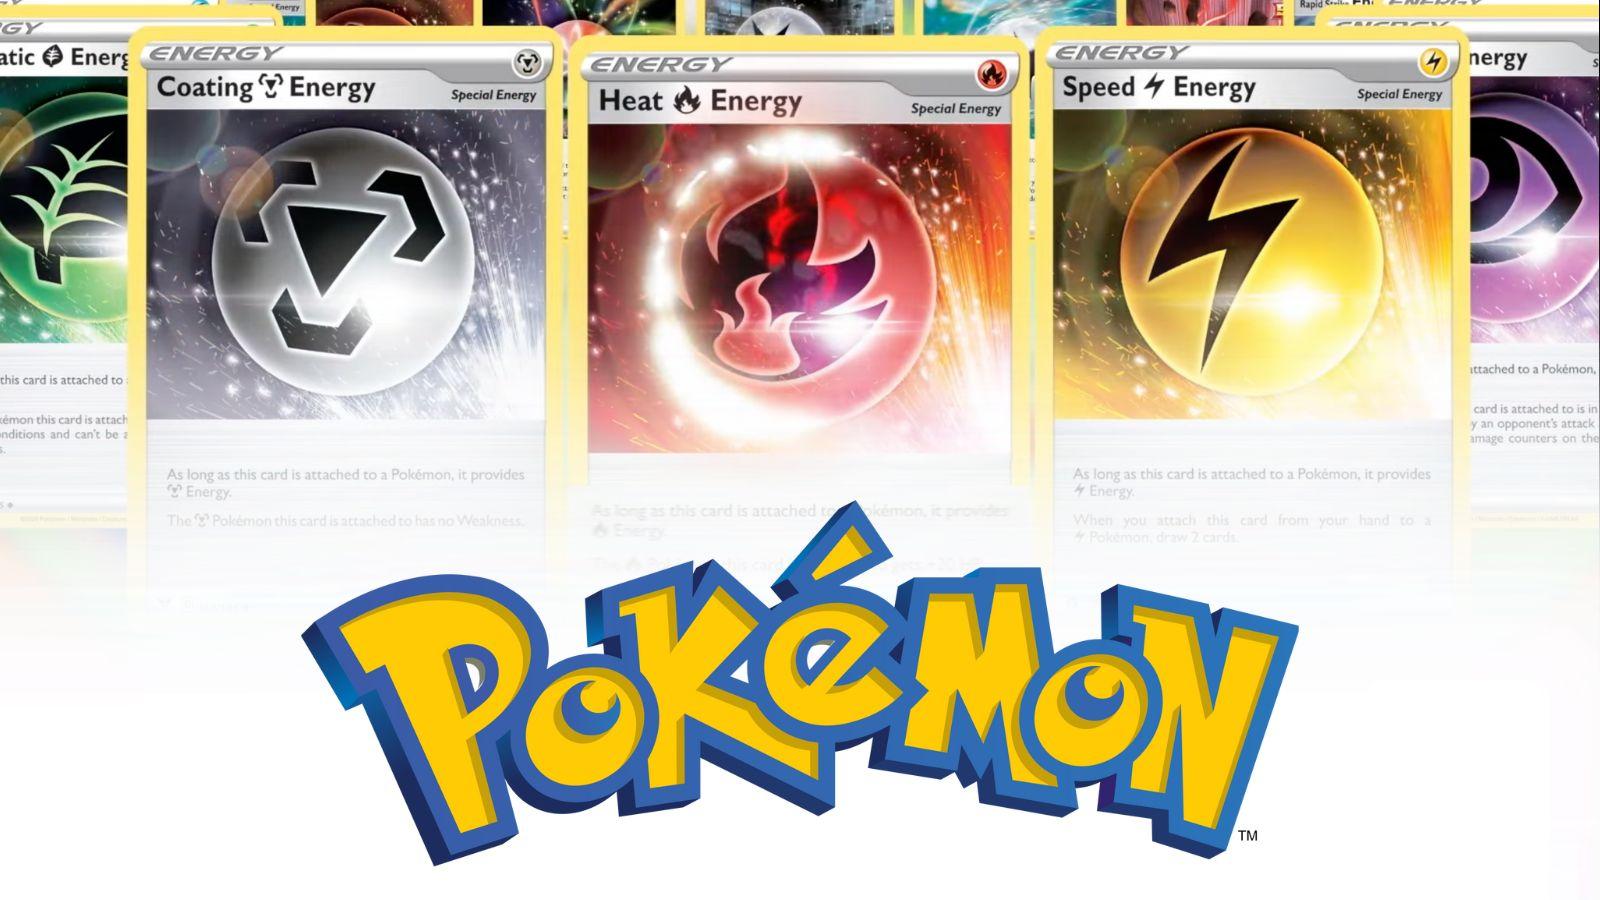 Pokemon TCG Most Valuable Energy Cards To Add to your Collection article banner featuring metal, fire, electric, grass and psychic energies and a Pokémon logo